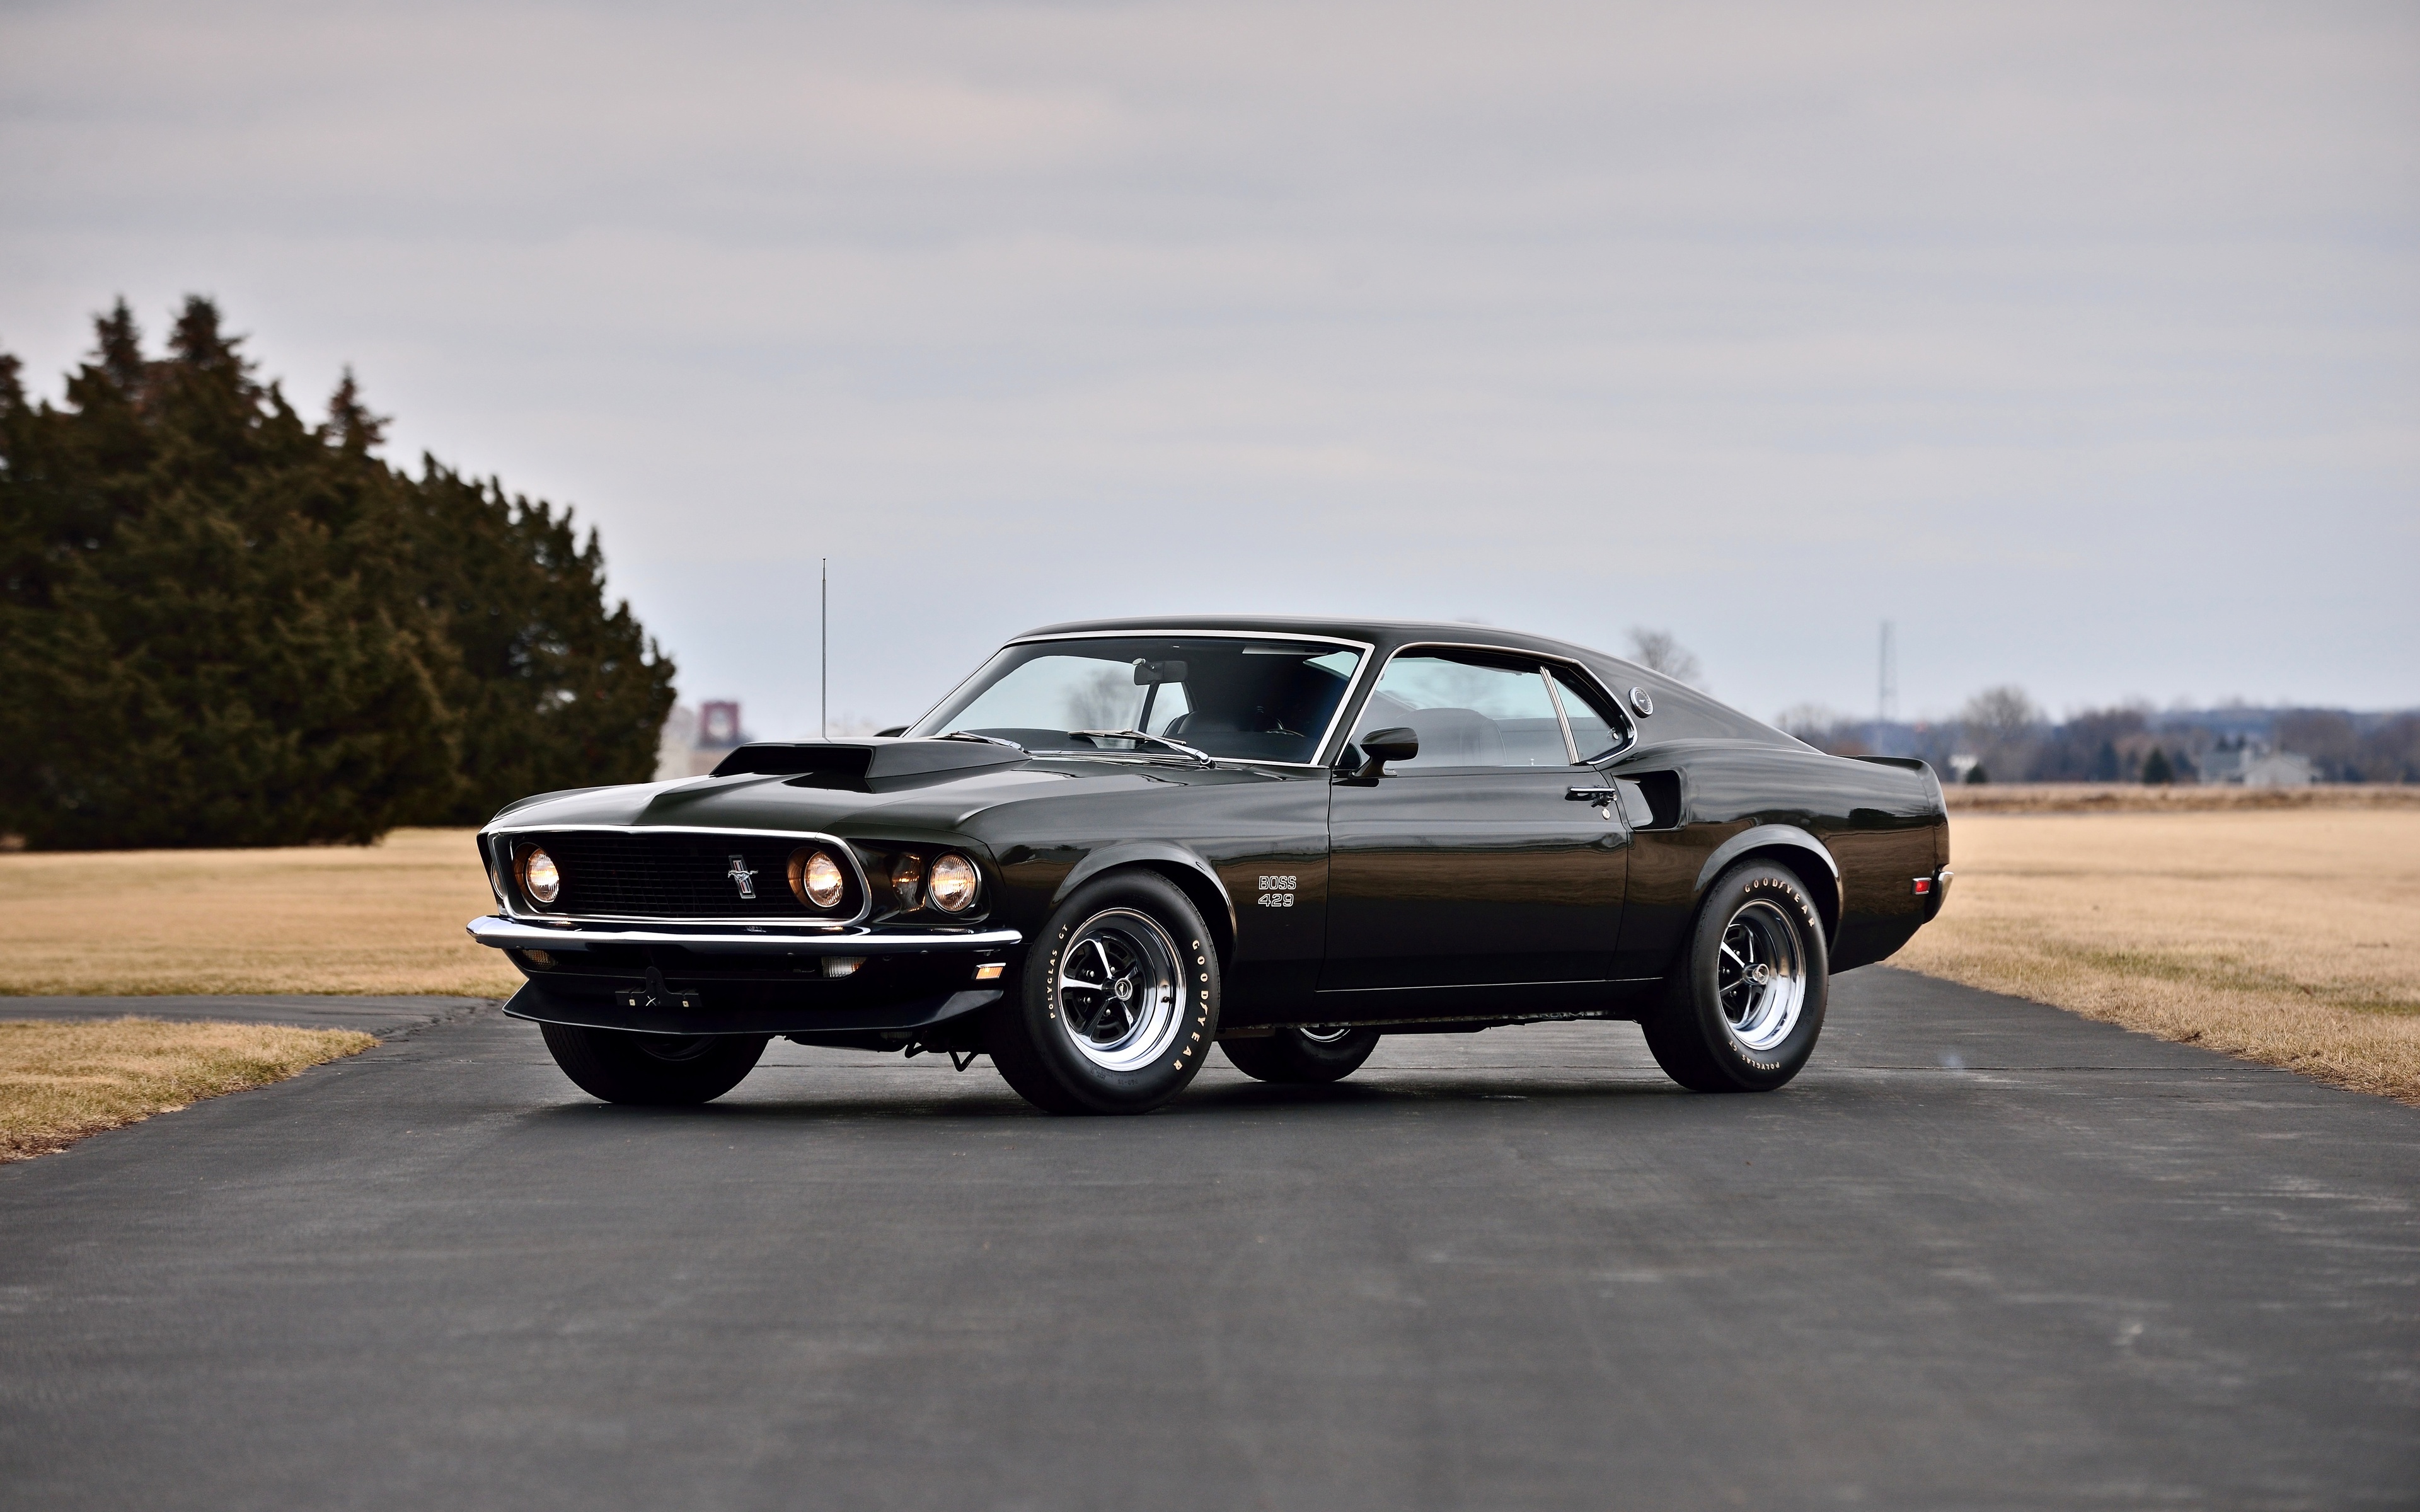 ford mustang boss 429, vehicles, black car, car, fastback, muscle car, ford iphone wallpaper